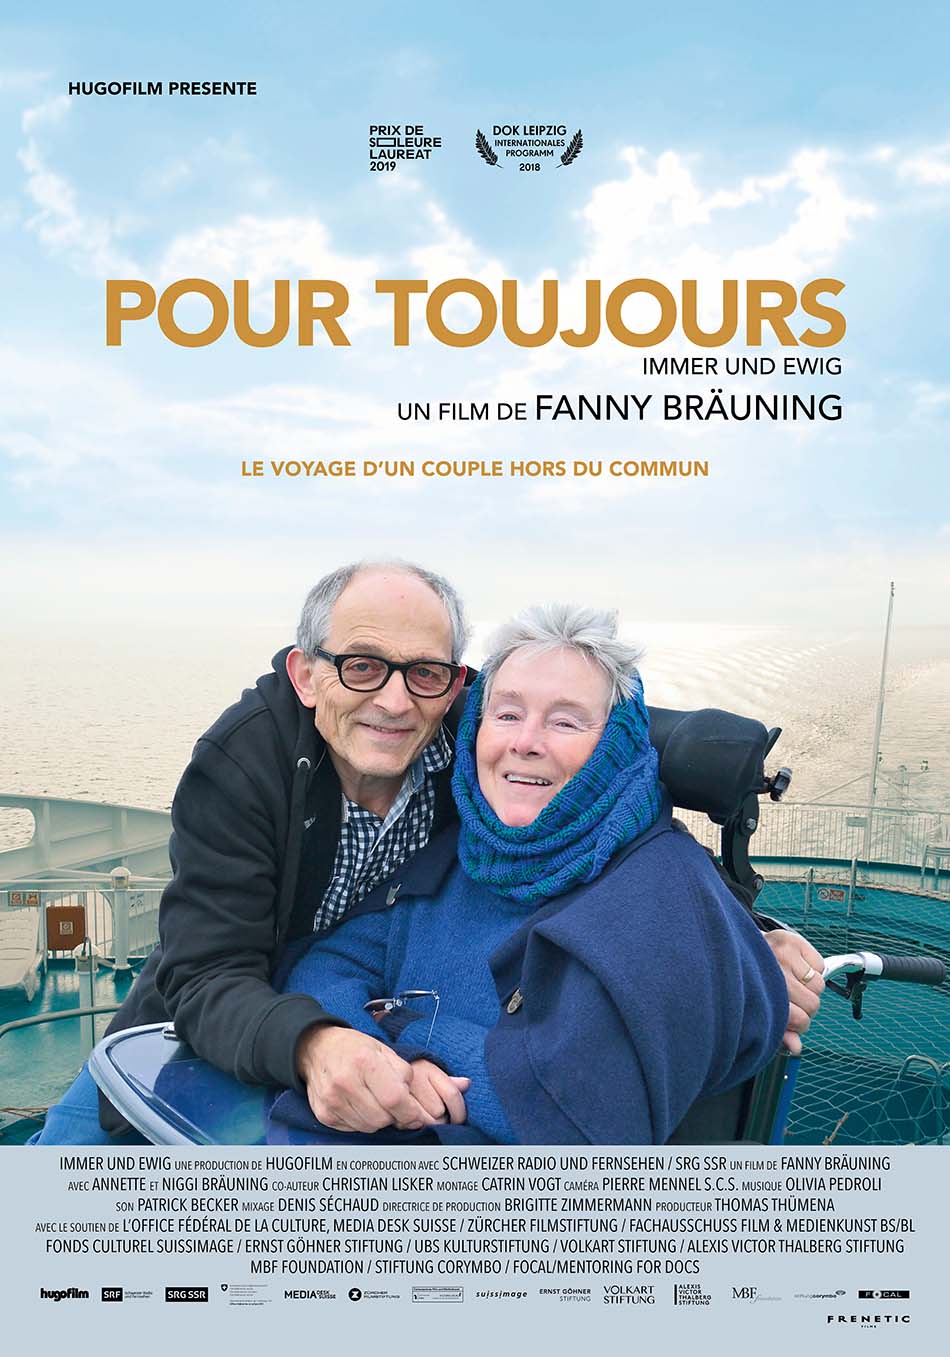 Immer Und Ewig - Pour Toujours de Fanny Brauning